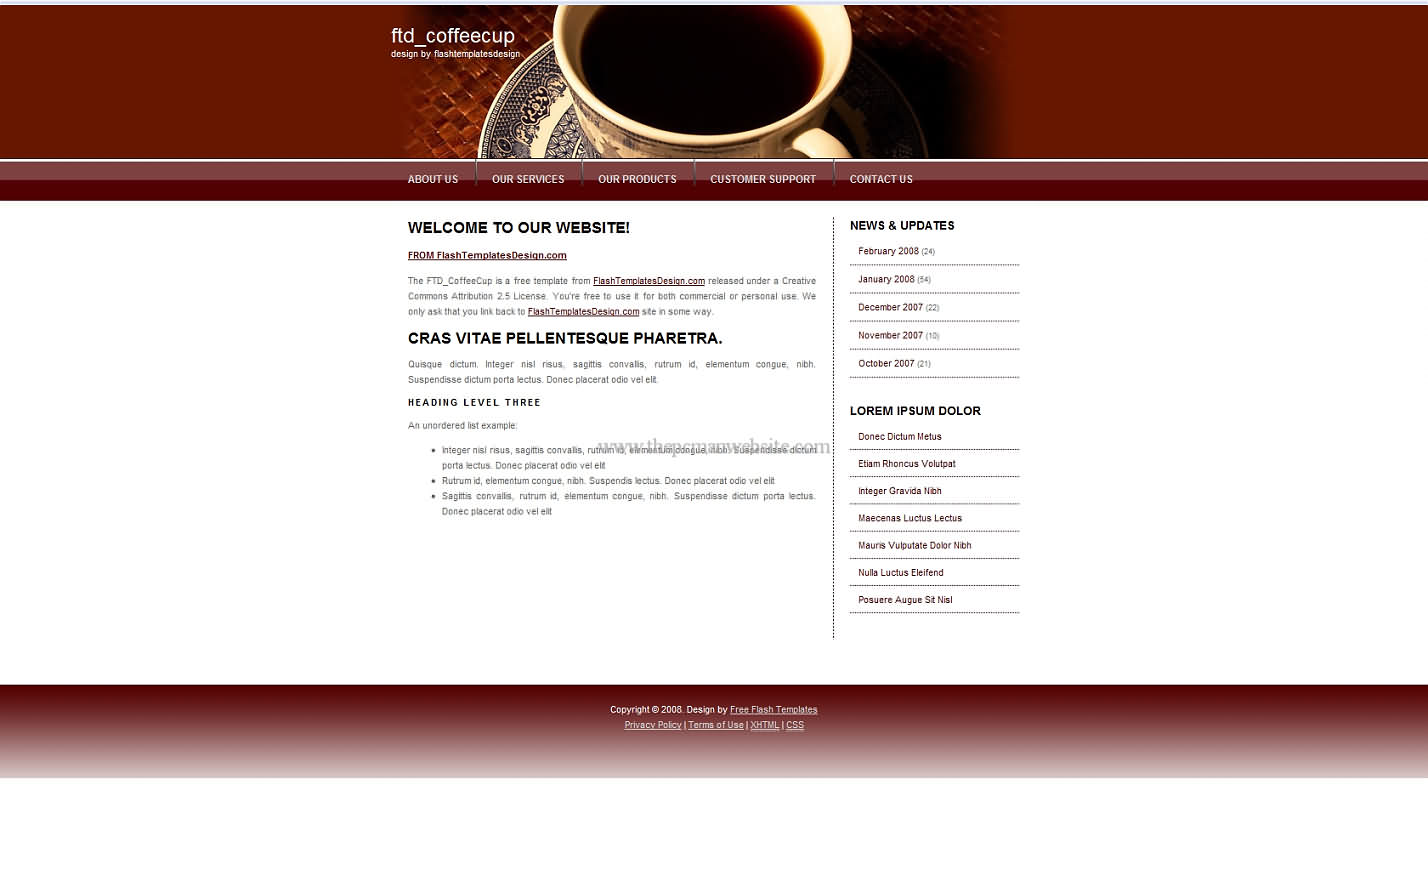 Ftd Coffeecup css template